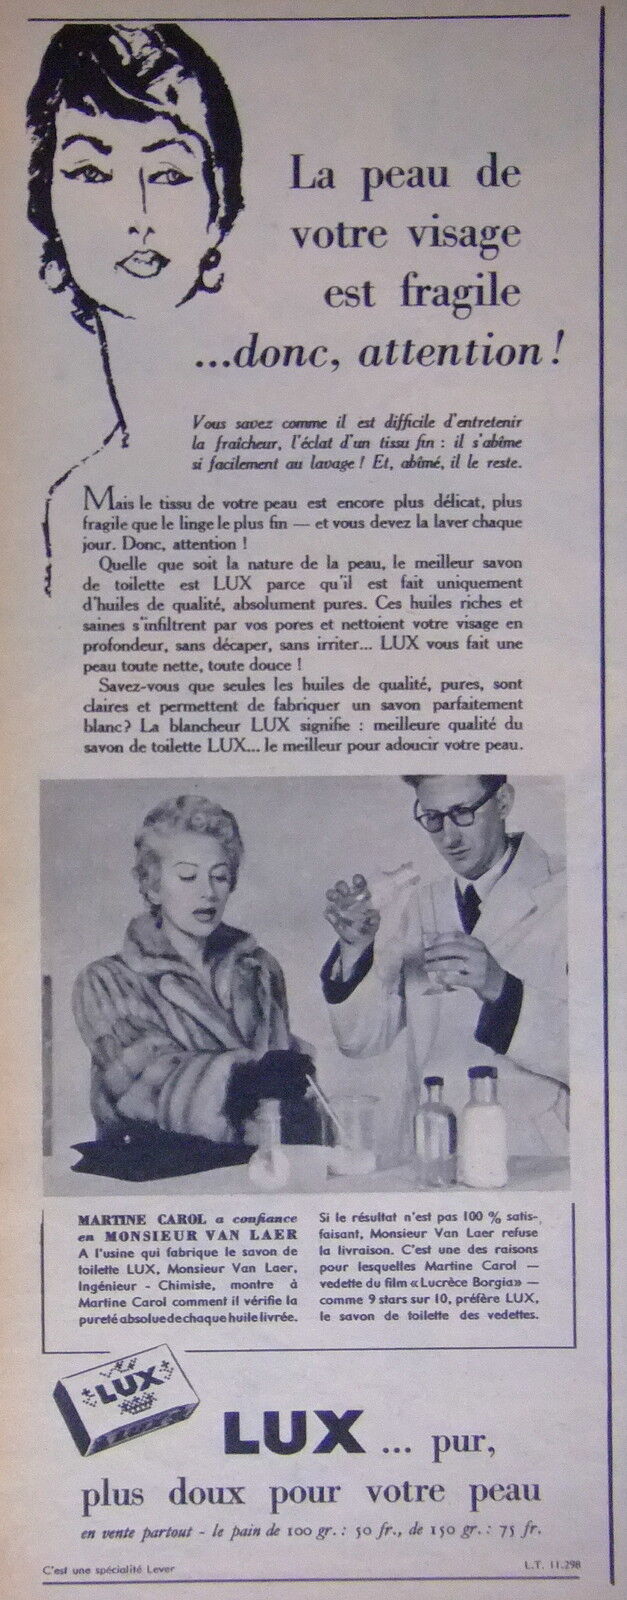 1954 ADVERTISING LUX PURE SOAP SOFTER YOUR FACE SKIN IS FRAGILE